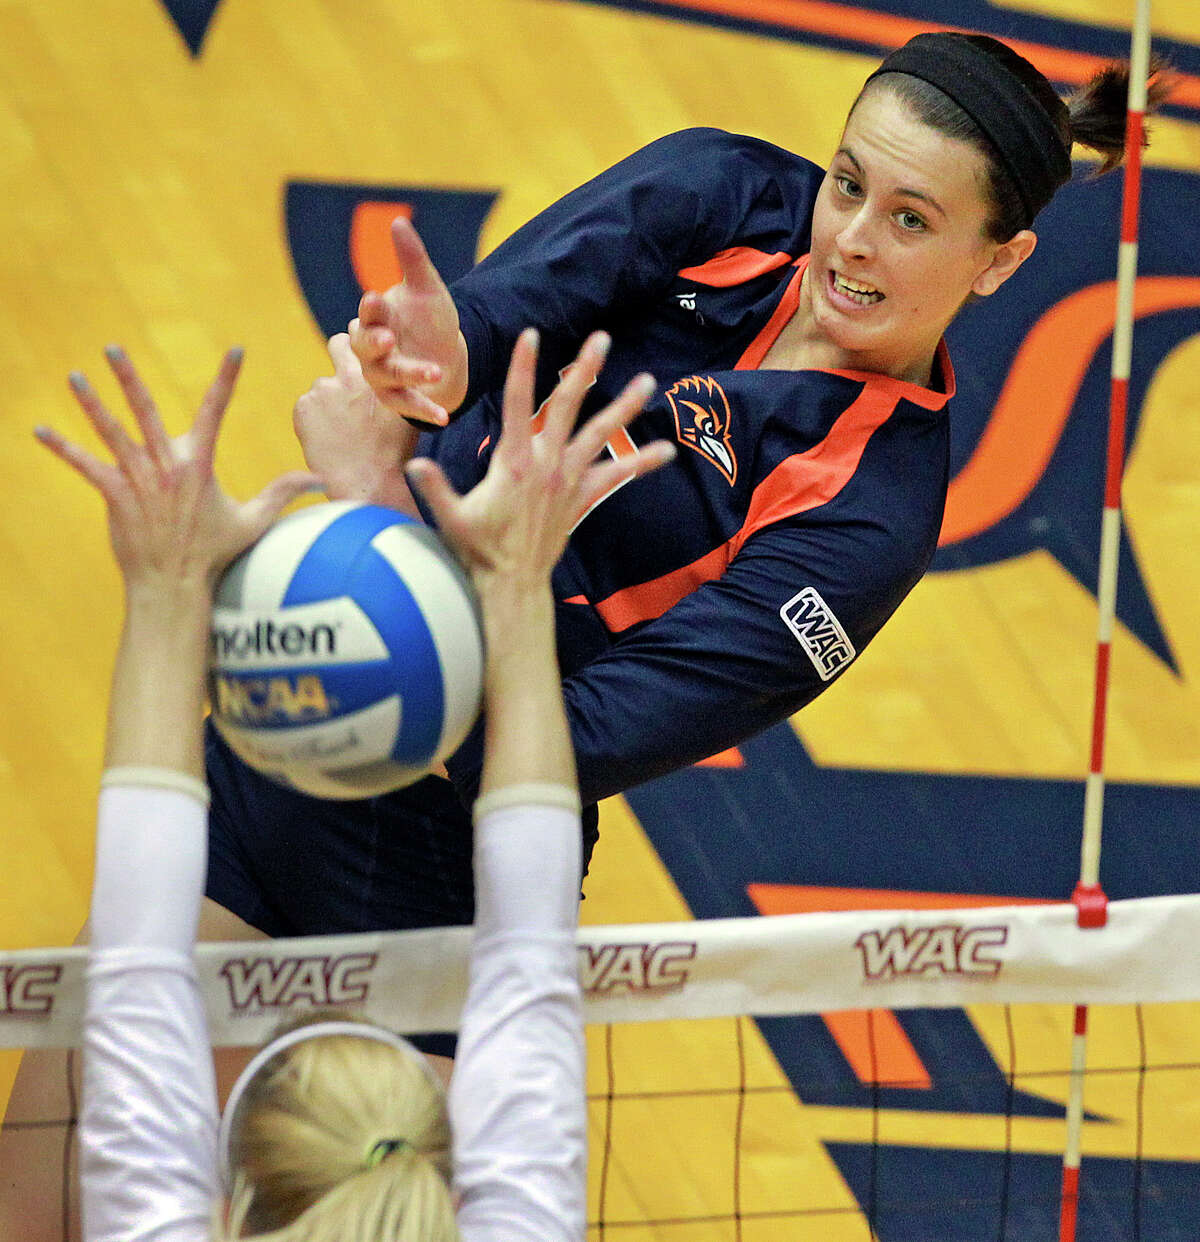 Adams dominated like few others in UTSA volleyball history. The 6-foot-3 outside hitter led the Roadrunners (24-8) to the Conference USA title and into the NCAA playoffs. Adams led the nation in kills per set and ranked second in points per set en route to third-team All-American and C-USA Player of the Year honors.